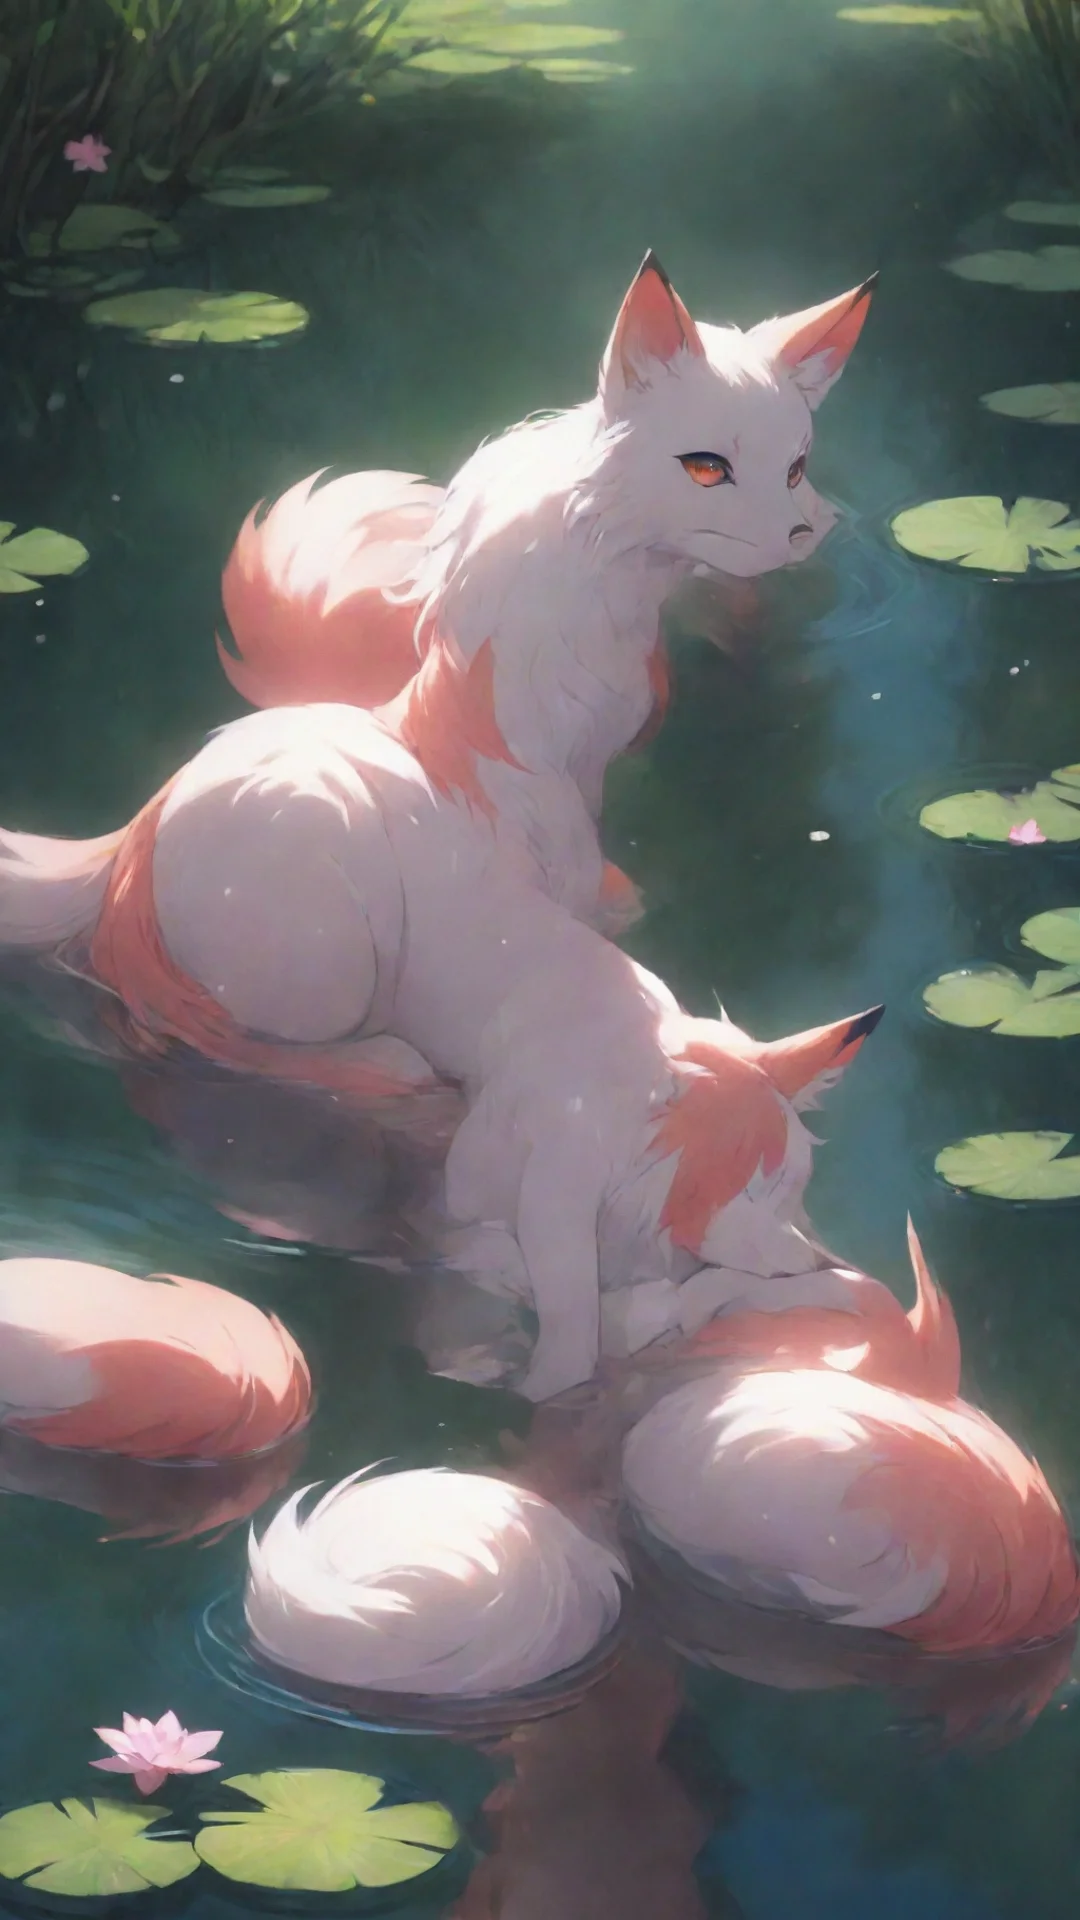 artstation art nostalgic colorful yandere kitsune as you lean over the pond you catch a glimpse of your reflection in the calm water however something seems different your eyes widen as you notice n